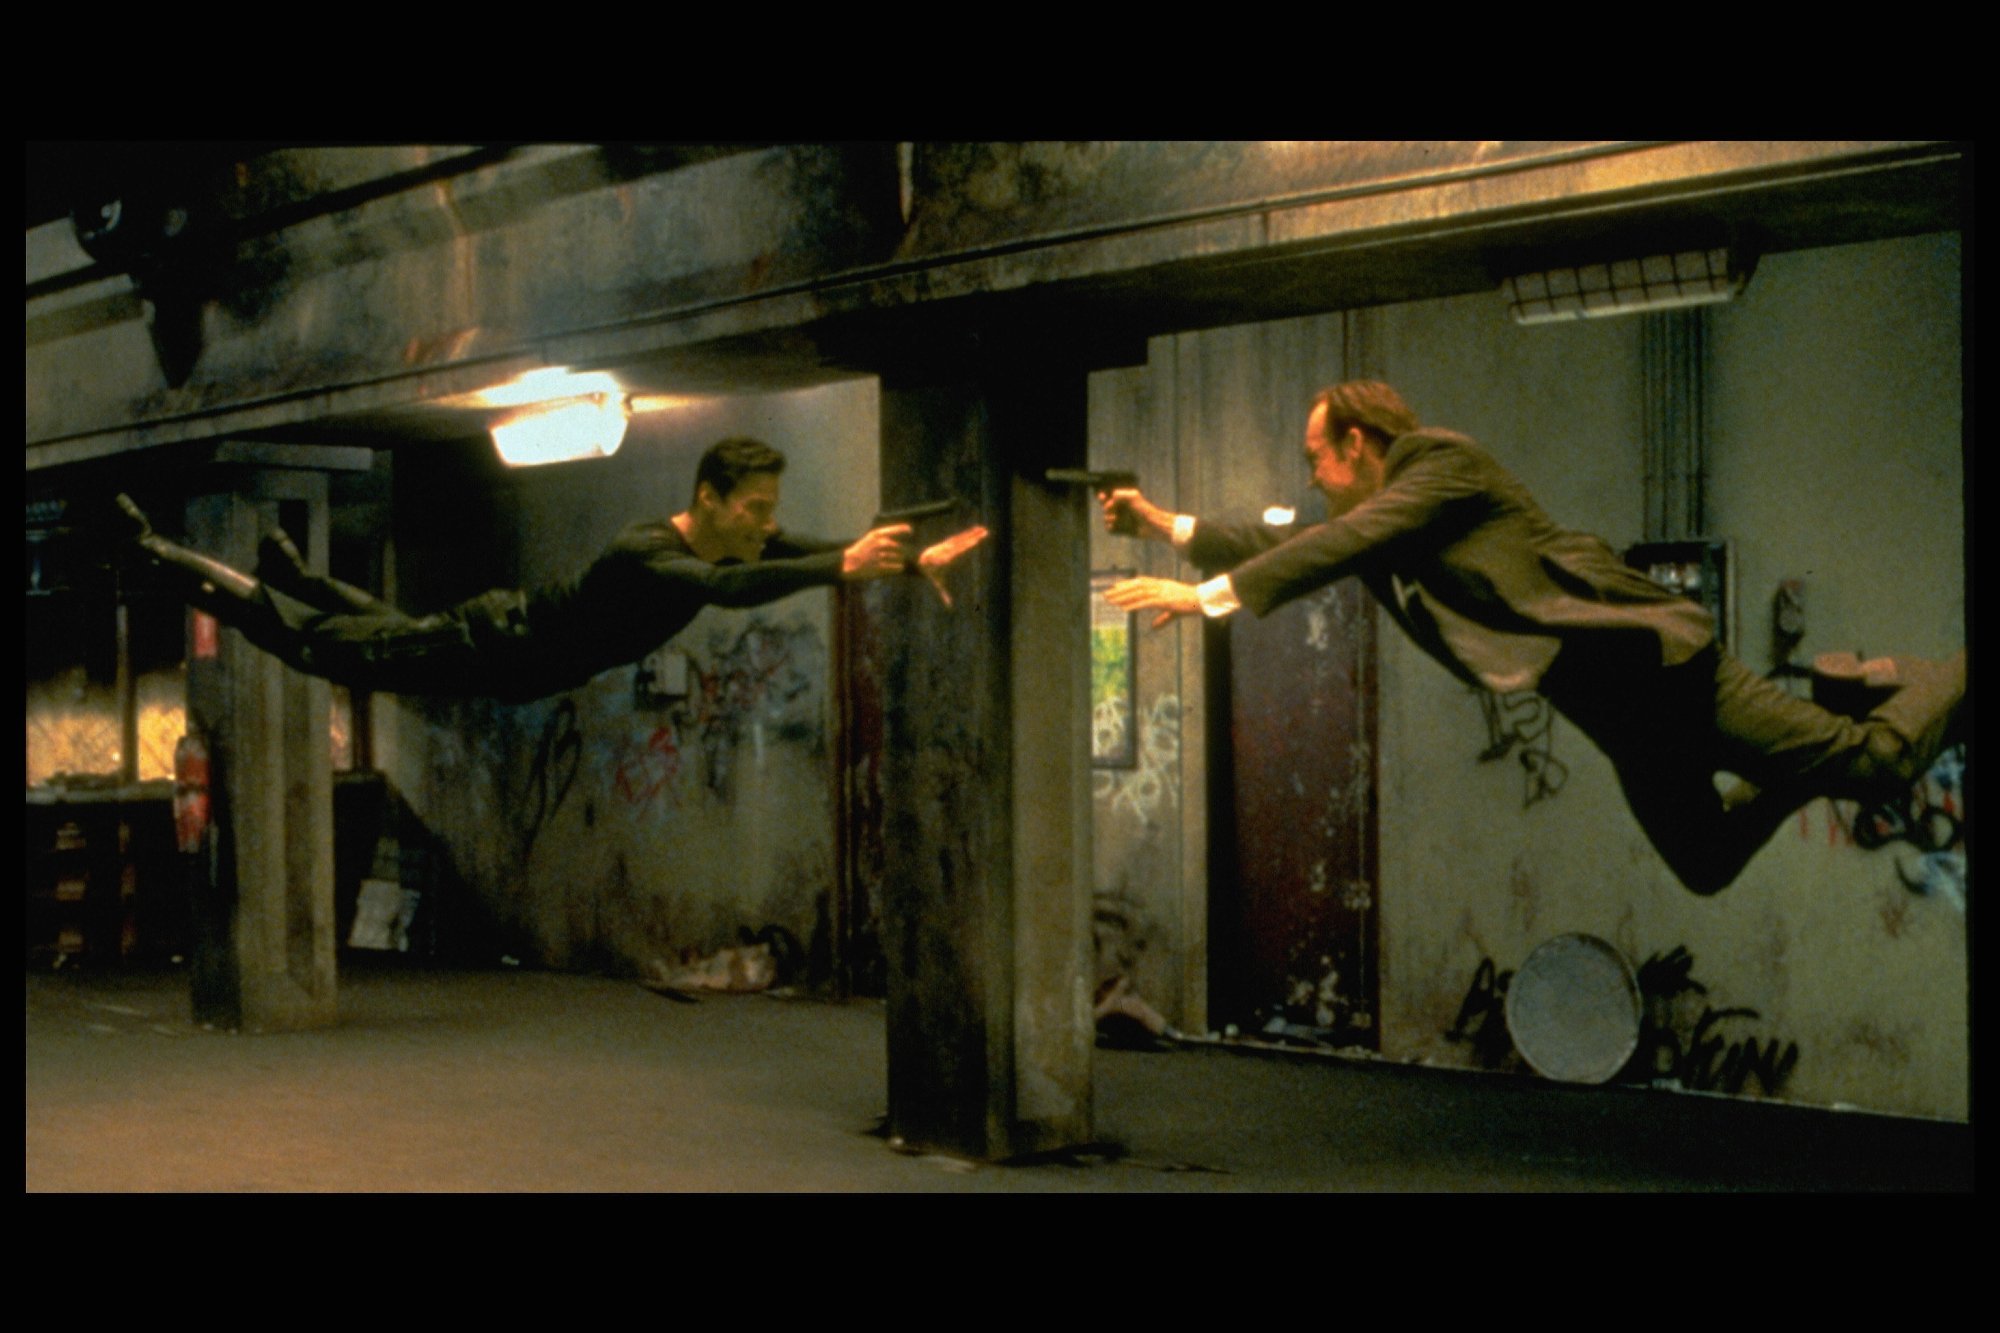 'The Matrix' stars Keanu Reeves as Neo and Hugo Weaving as Agent Smith facing each other mid-air with guns